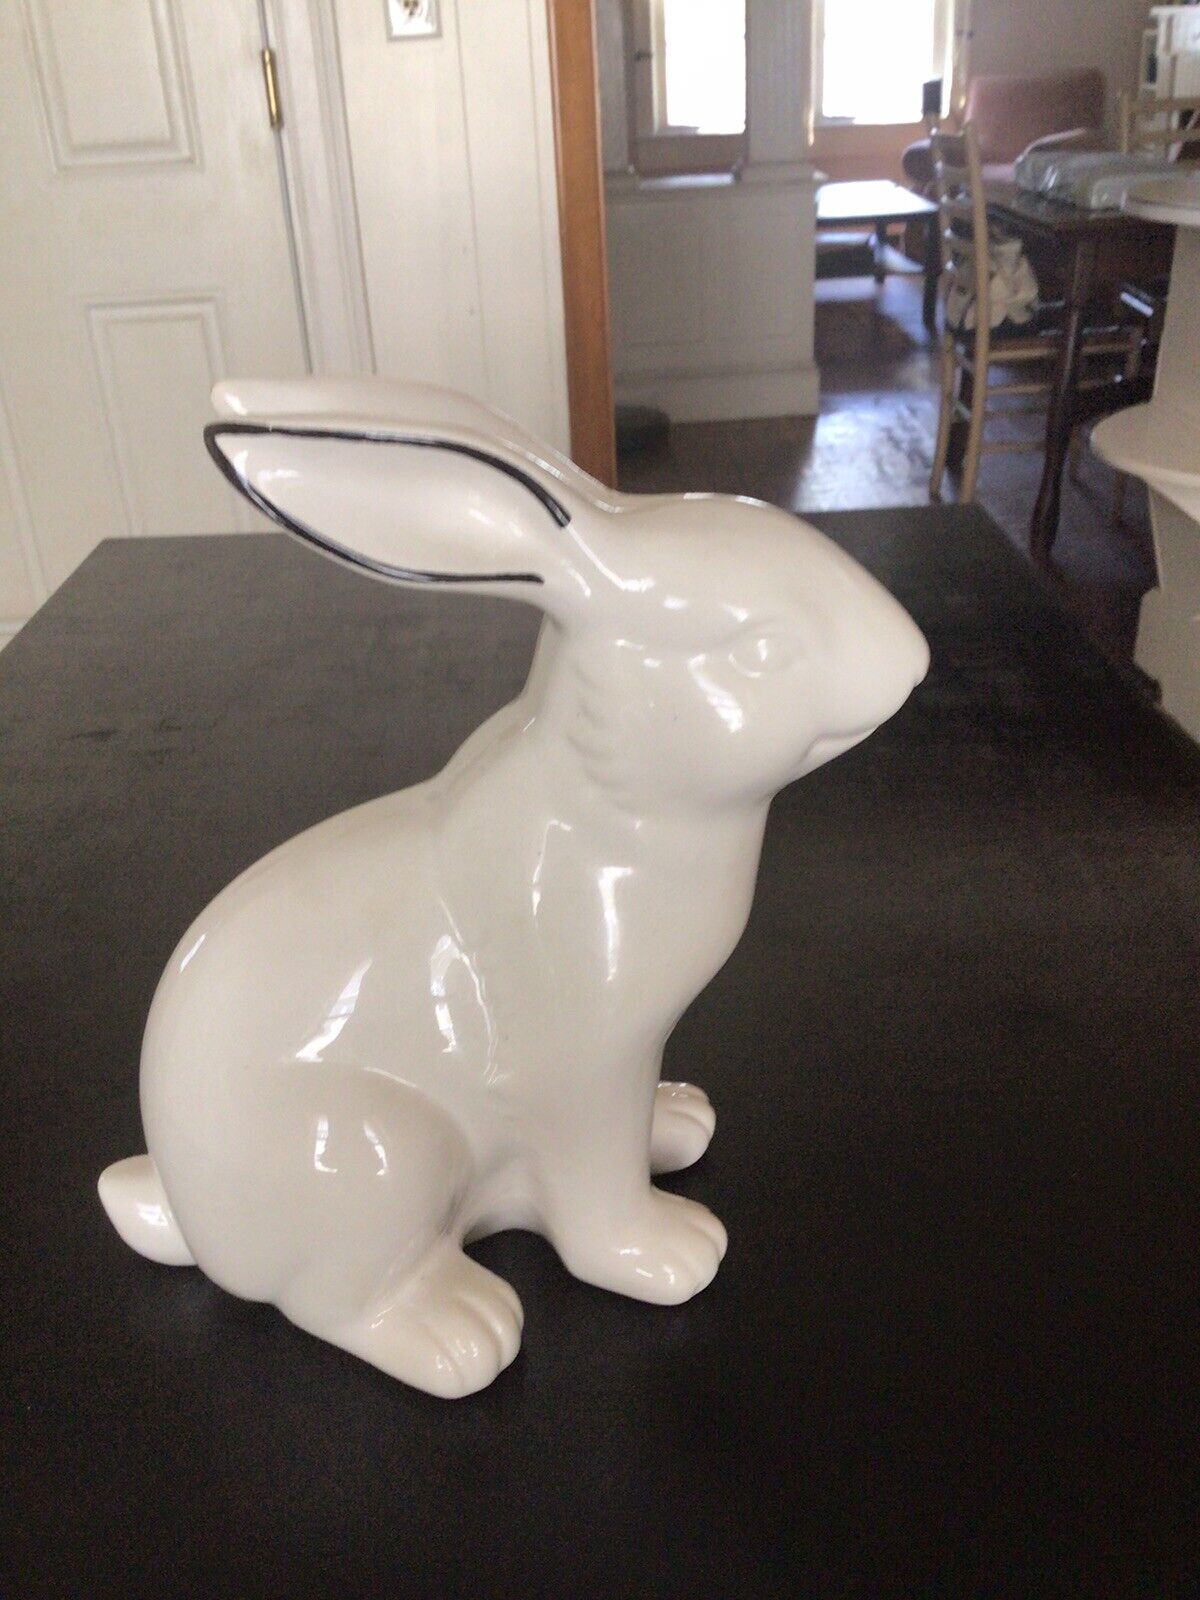 9” Ceramic Bunny Rabbit Figurine. Glossy White with touch of black. No chips